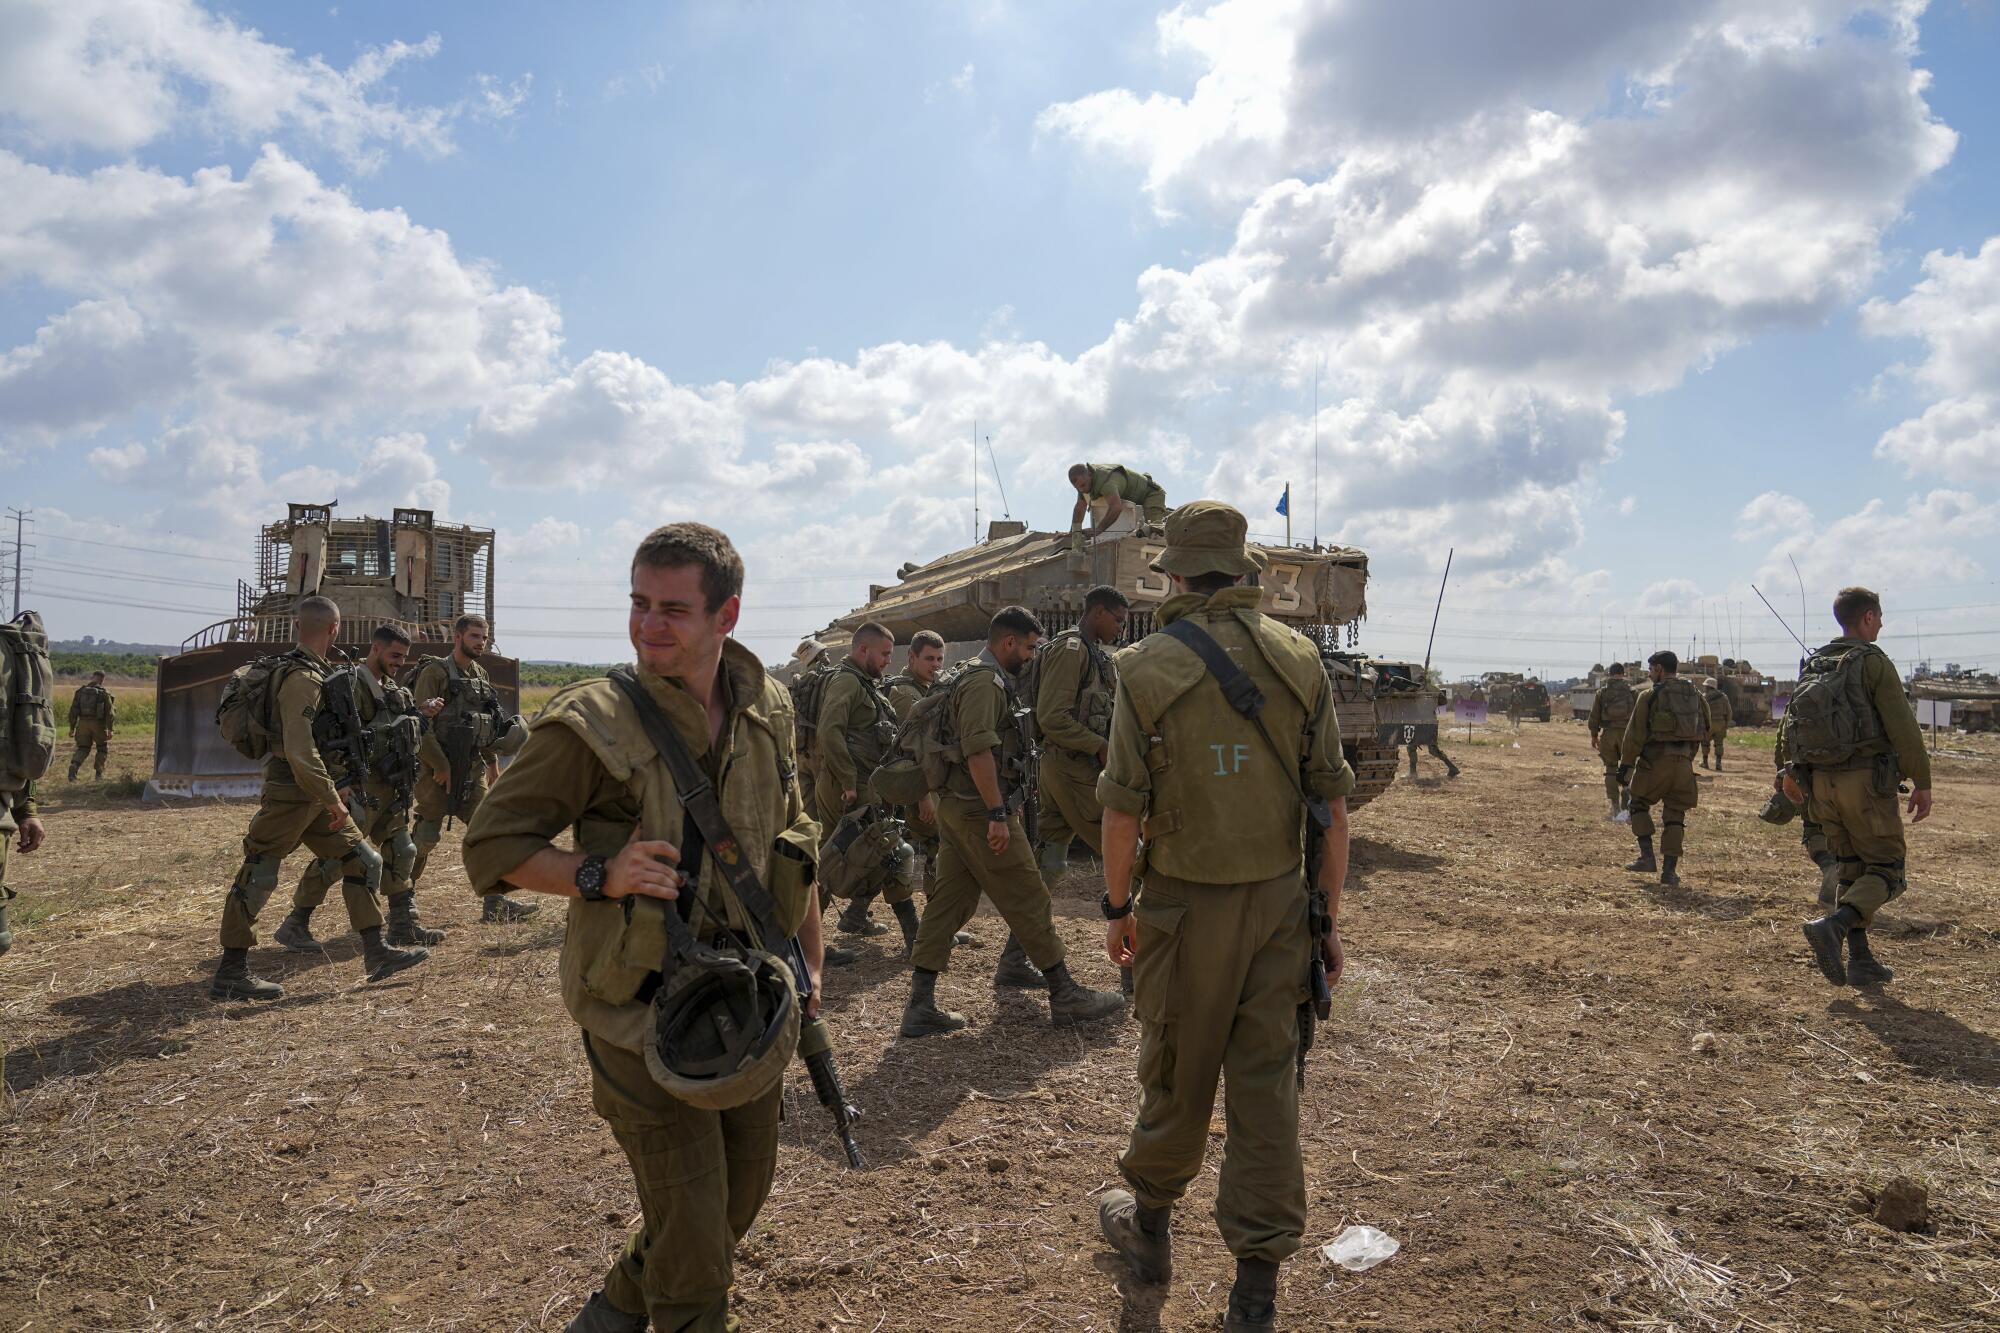 Israeli soldiers at a staging area near the border with Gaza Strip